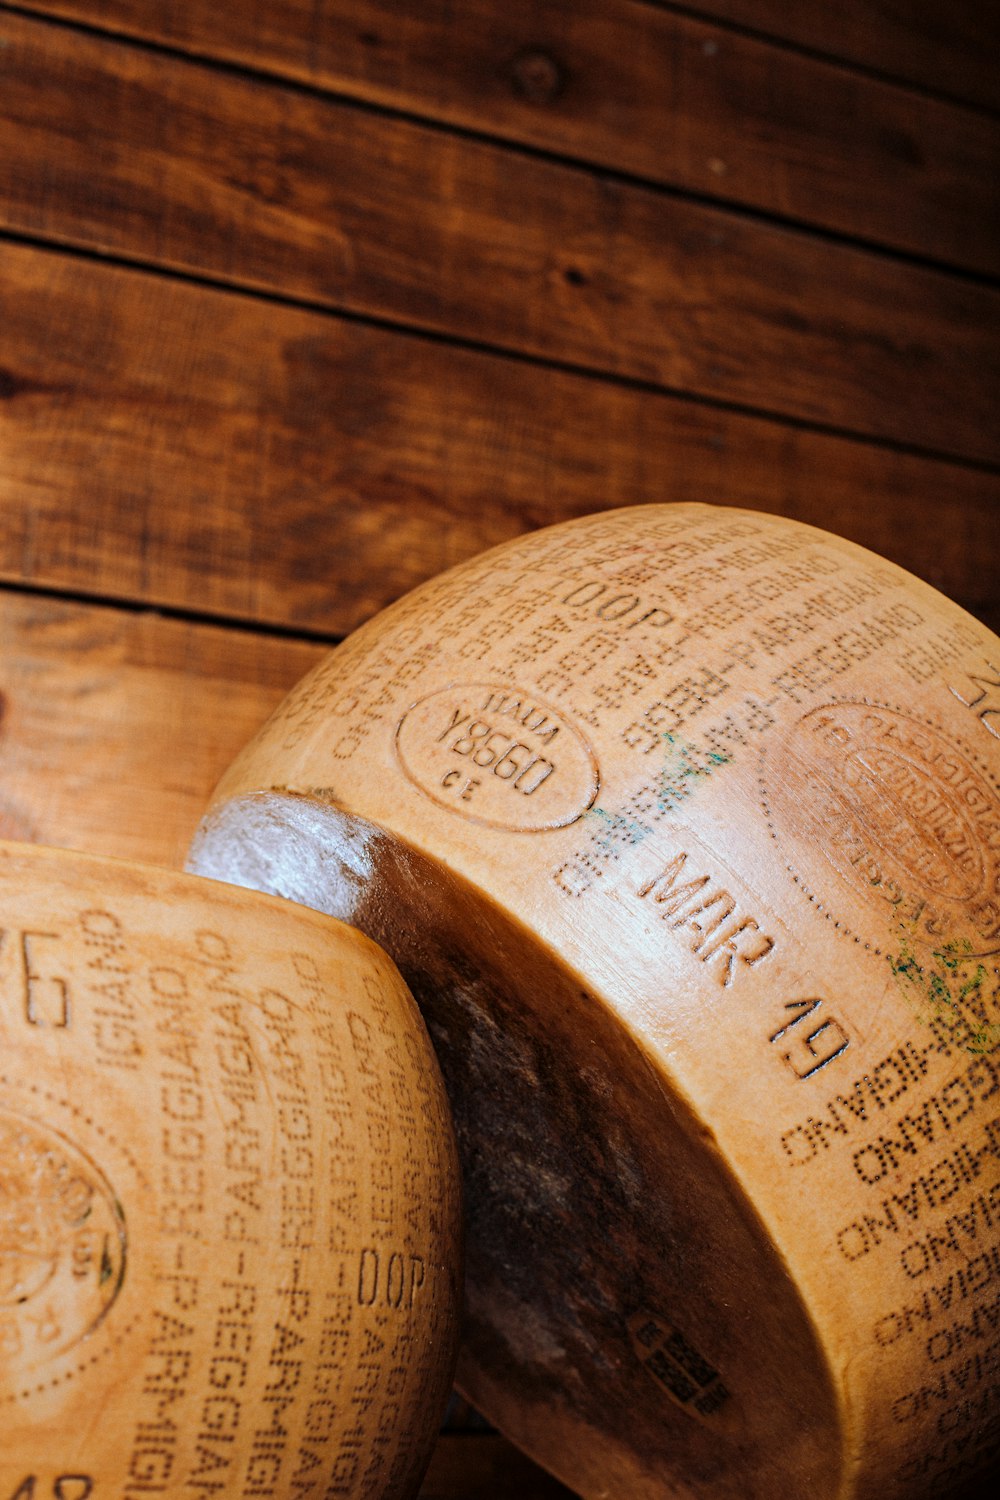 a close up of two cheese wheels on a wooden surface